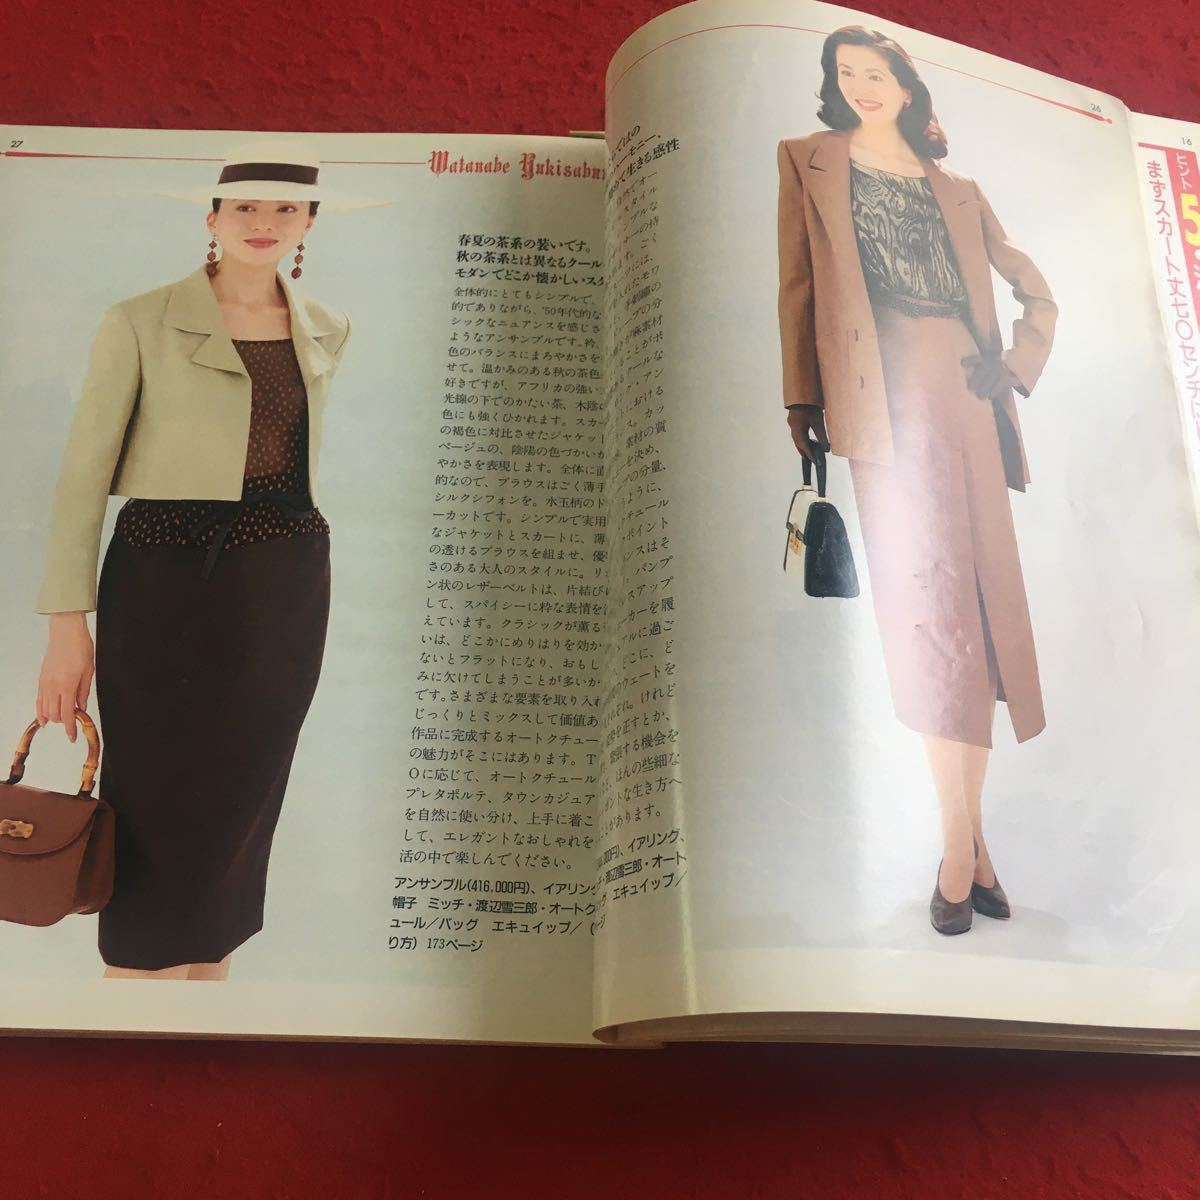 b-019*3 Mrs.. style book 1994 year spring special collection : Mrs.. put on . none. hinto compilation culture publish department 